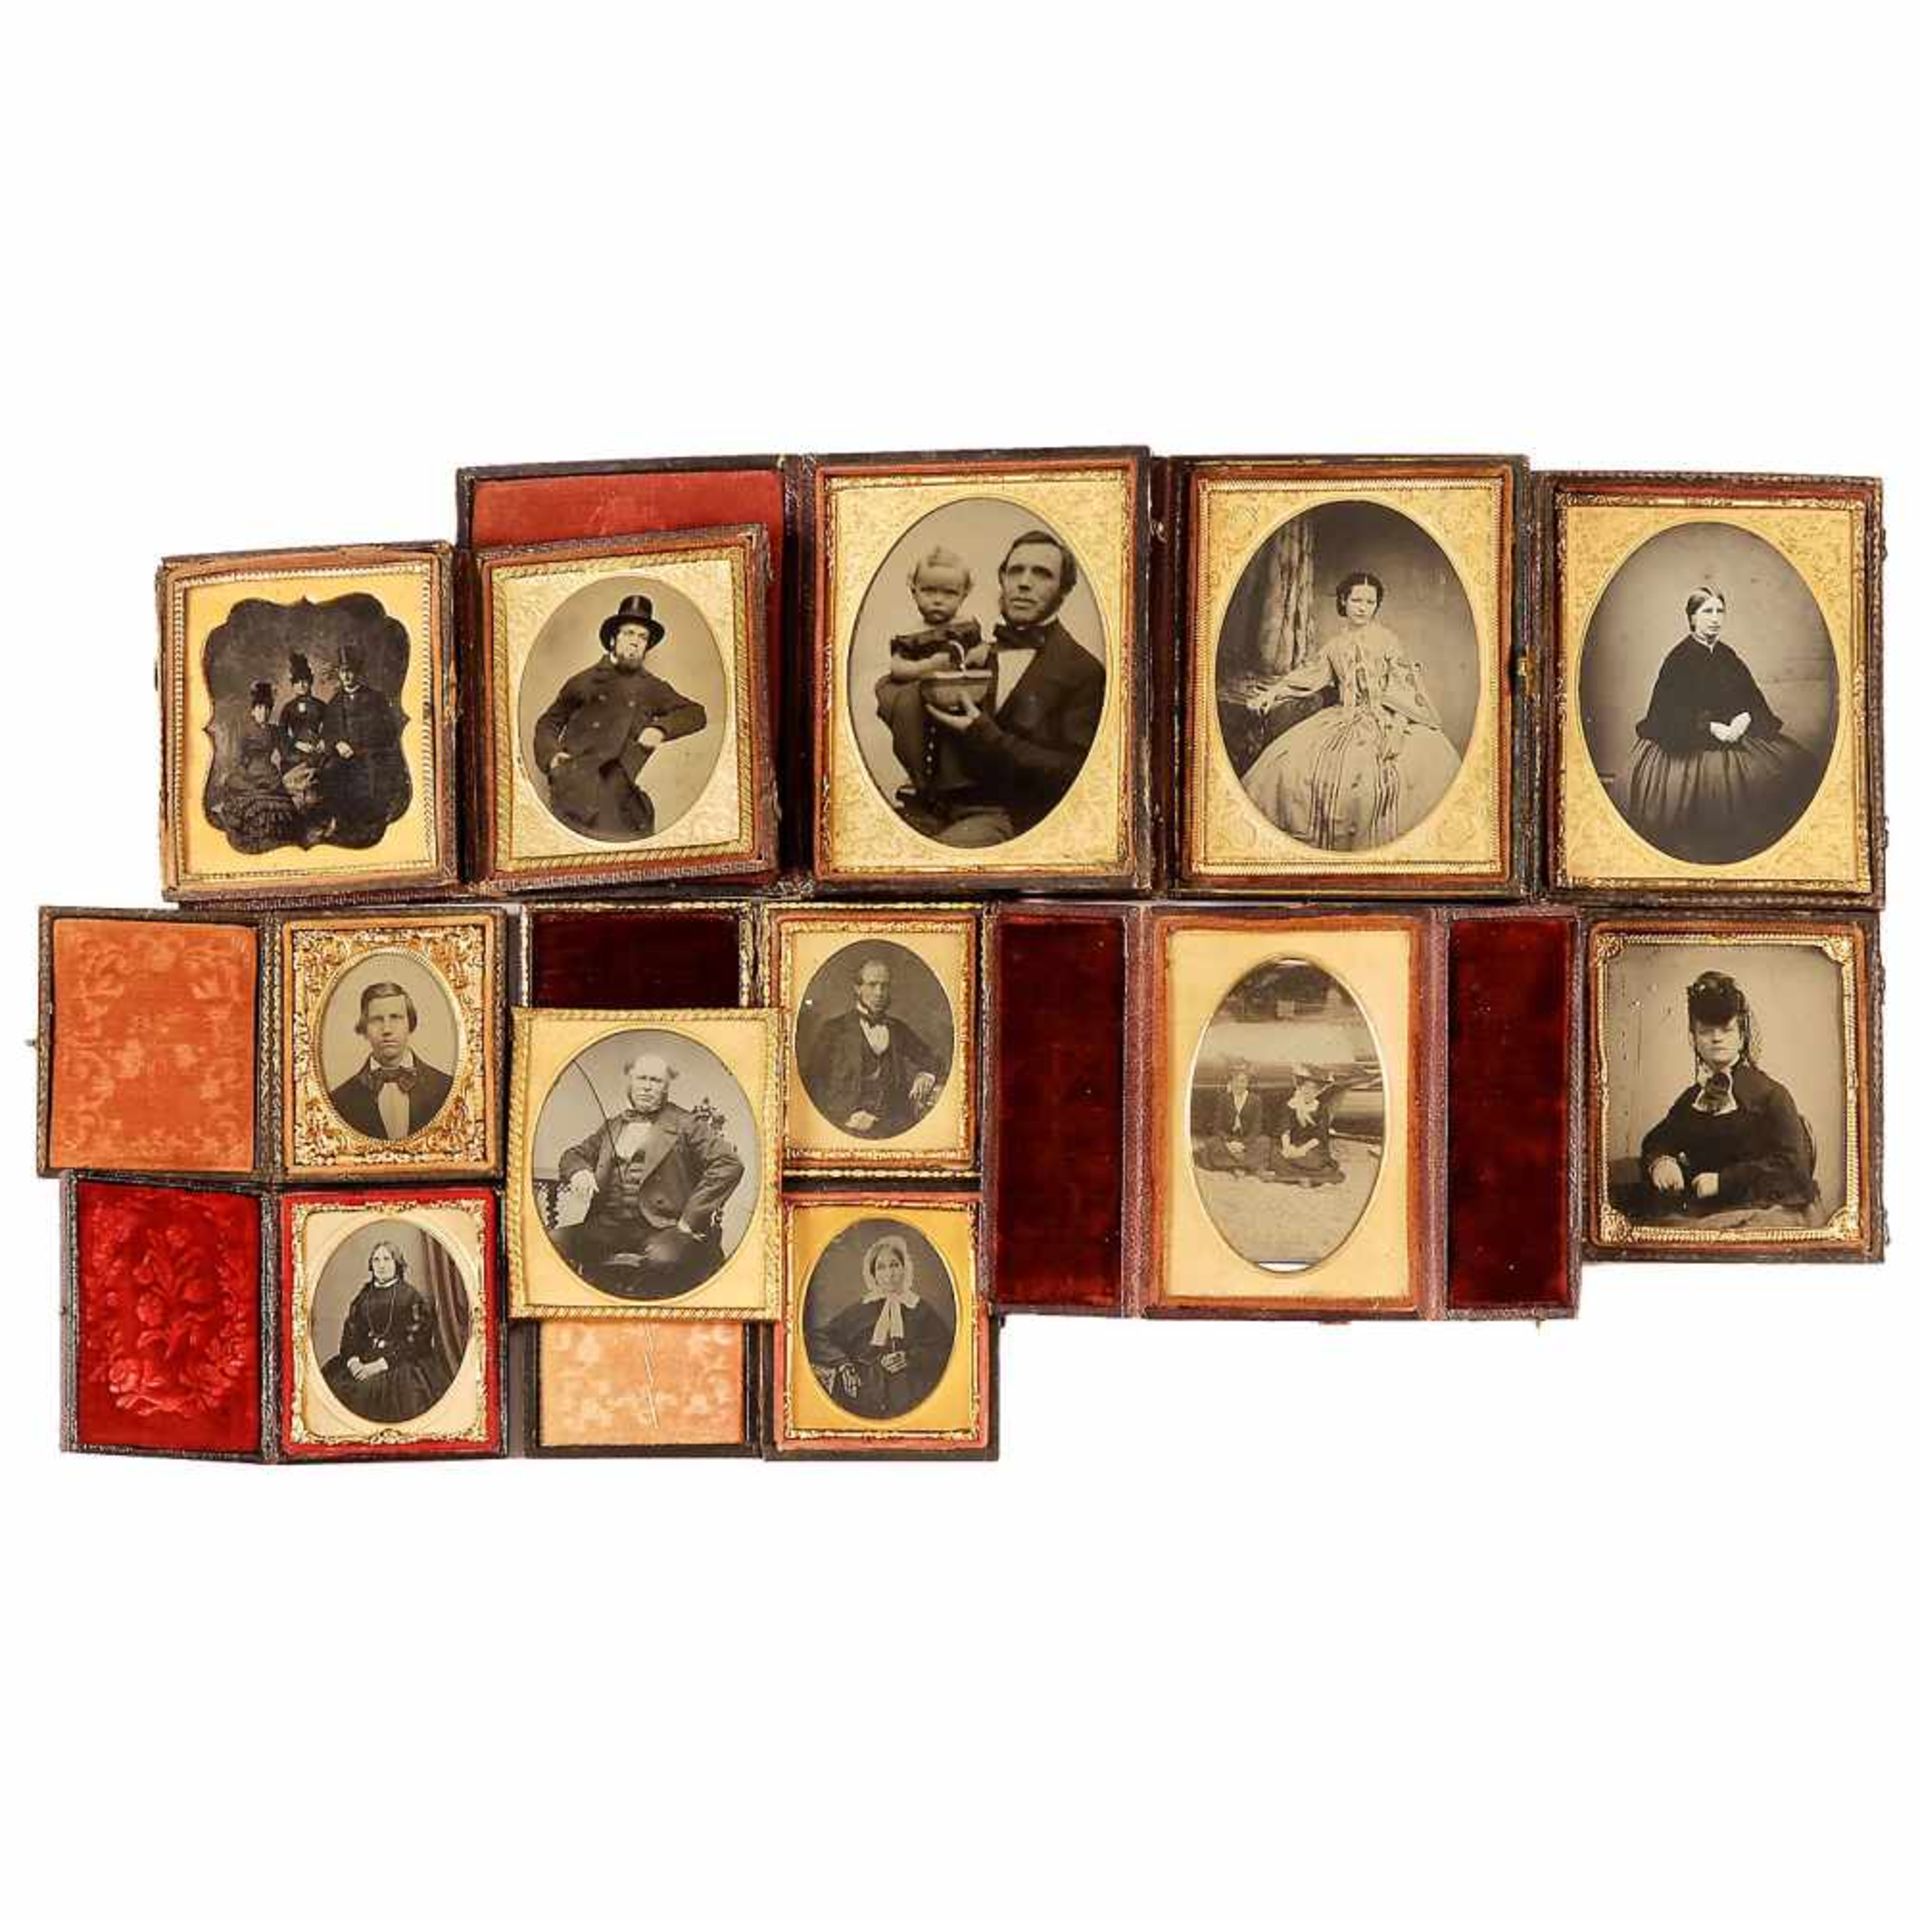 12 Ambrotypes, c. 1850–60England or USA. 1/8 plate to ¼ plate, 10 with cases, some hand-tinted, 1